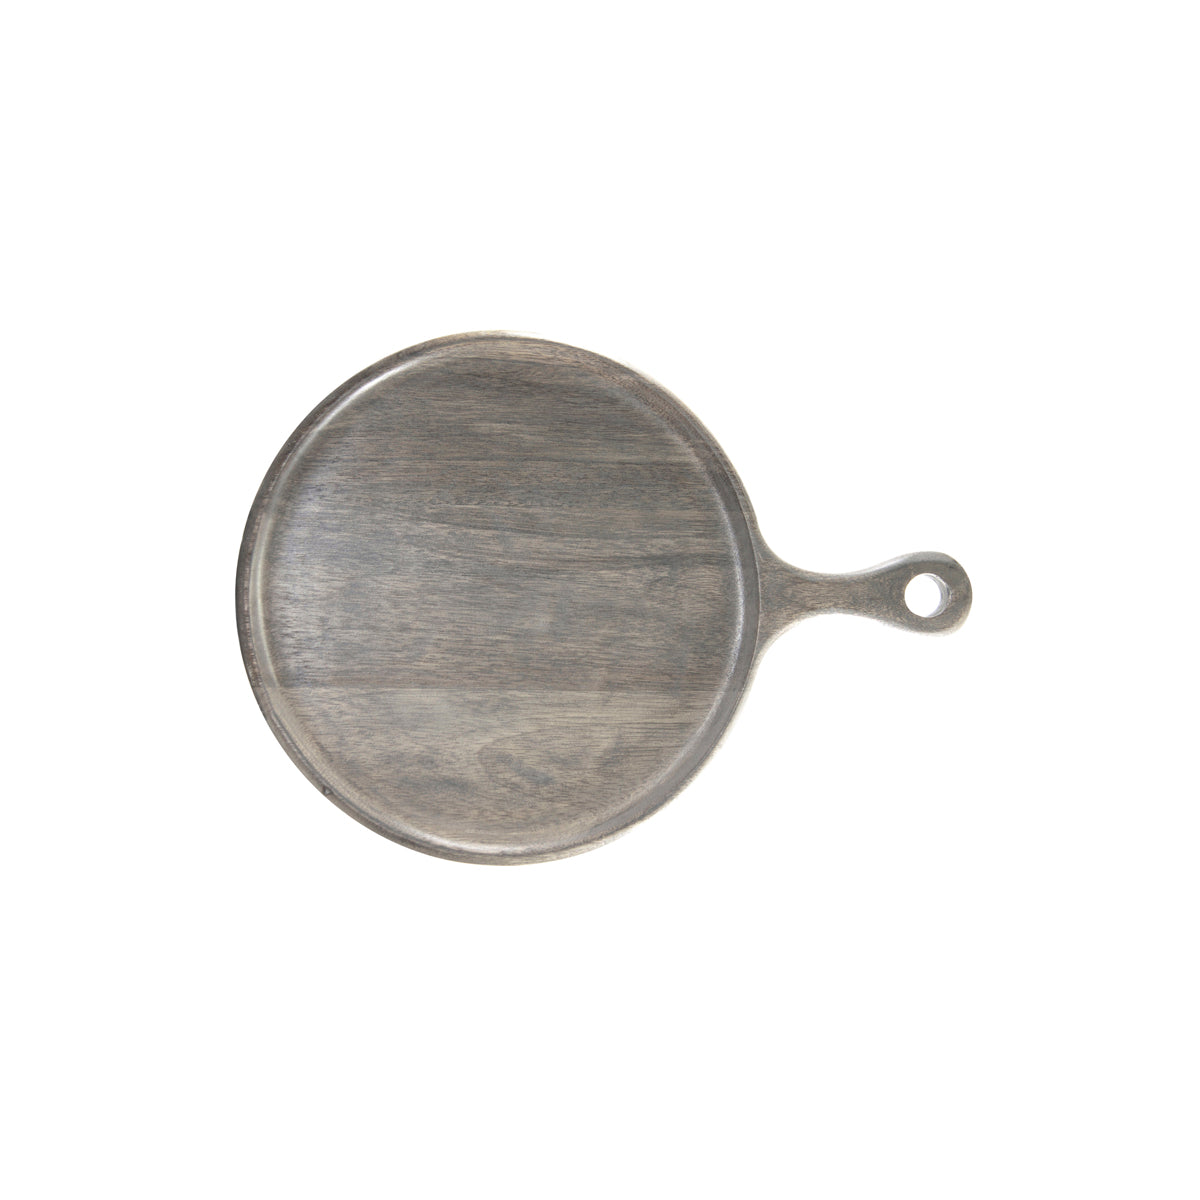 '04842 Chef Inox Mangowood Round Serving Board with Handle Grey 250x15mm Tomkin Australia Hospitality Supplies